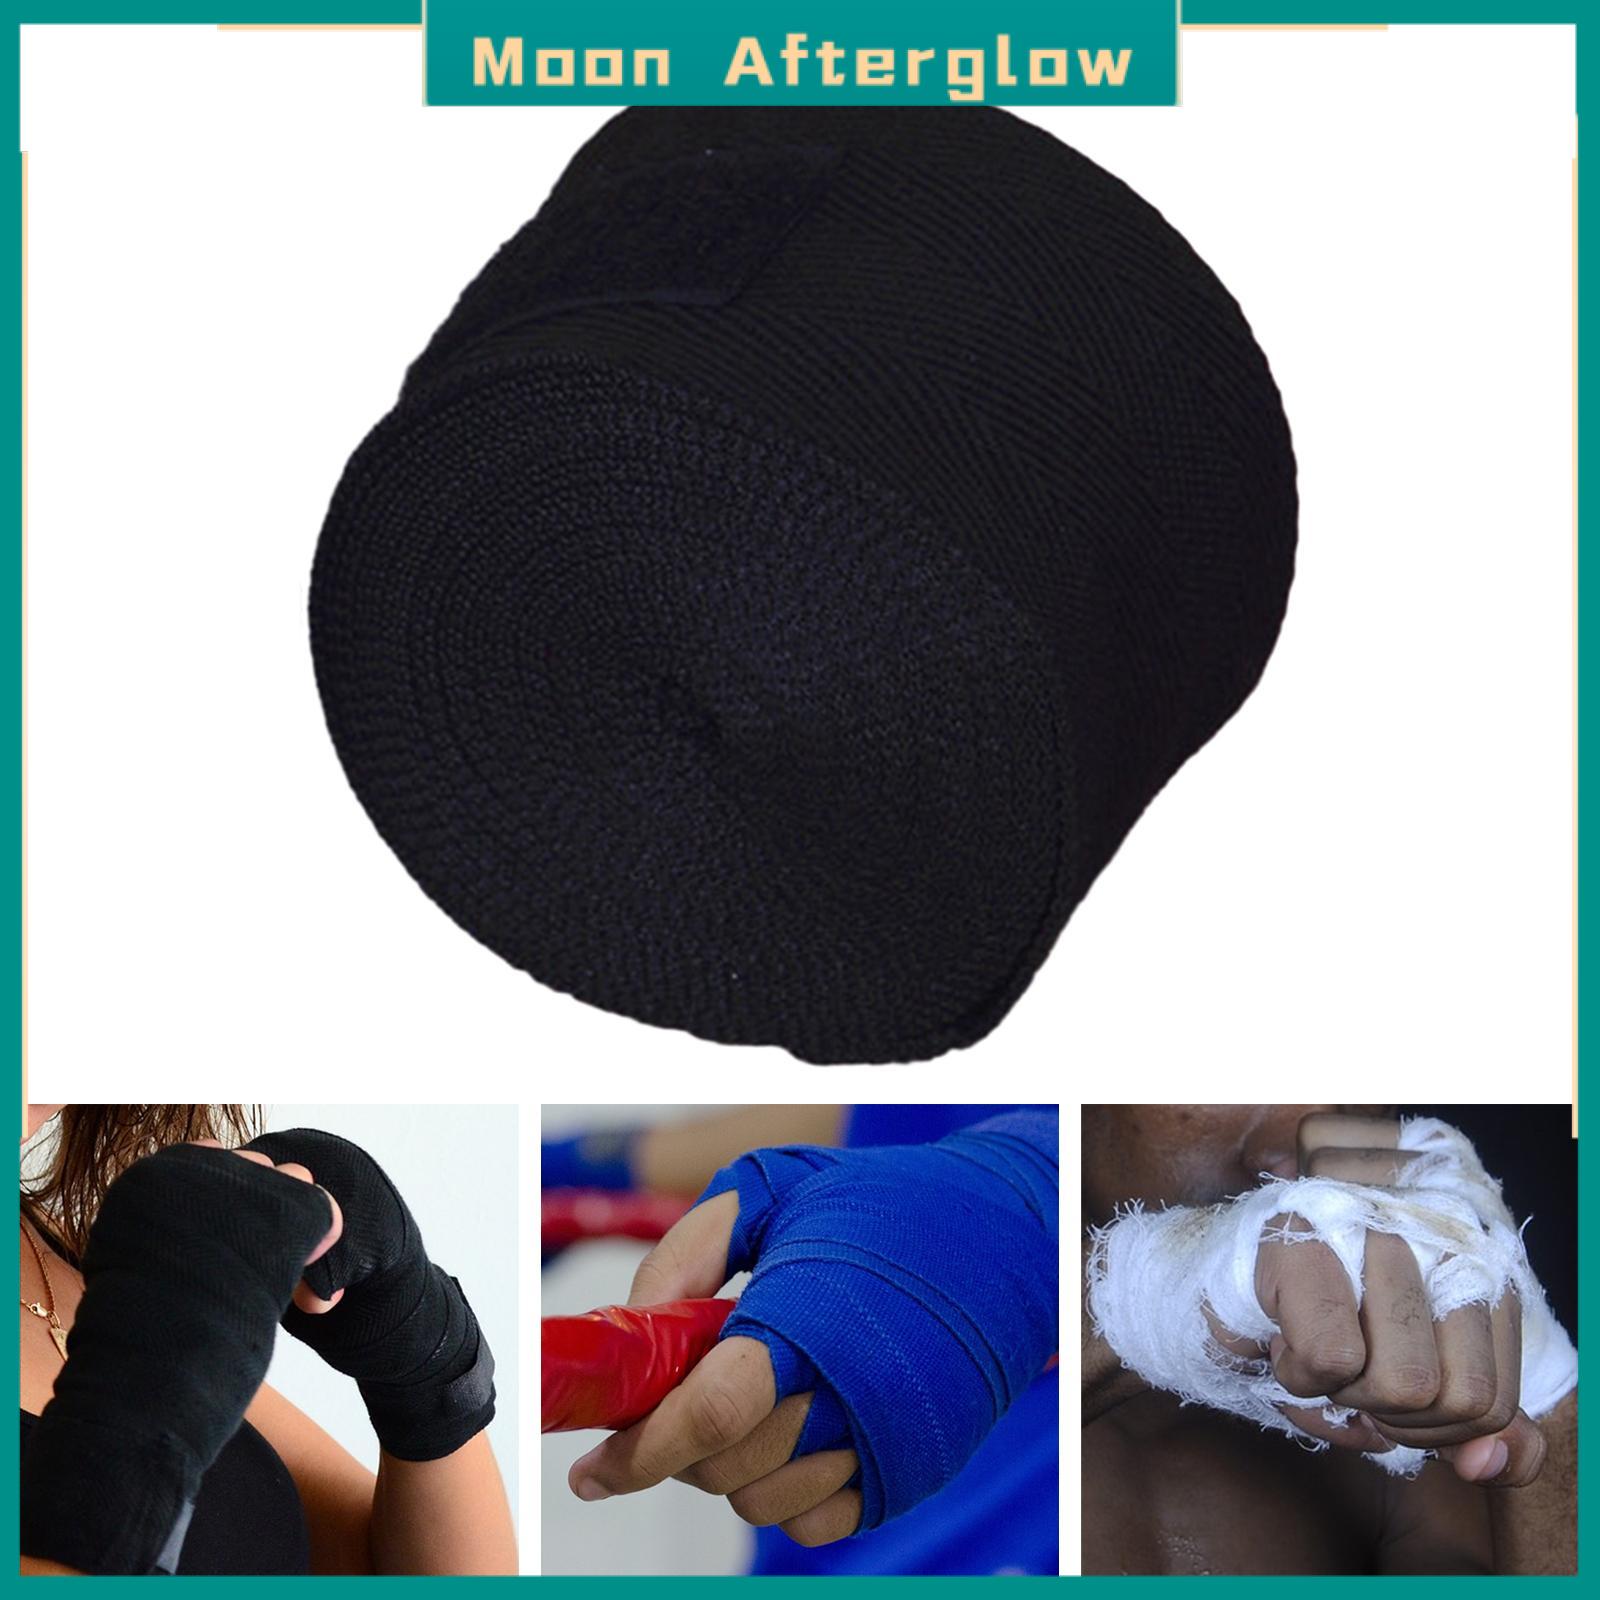 Moon Afterglow Boxing Bandages Cotton Boxing Hand Wraps for Muay Thai